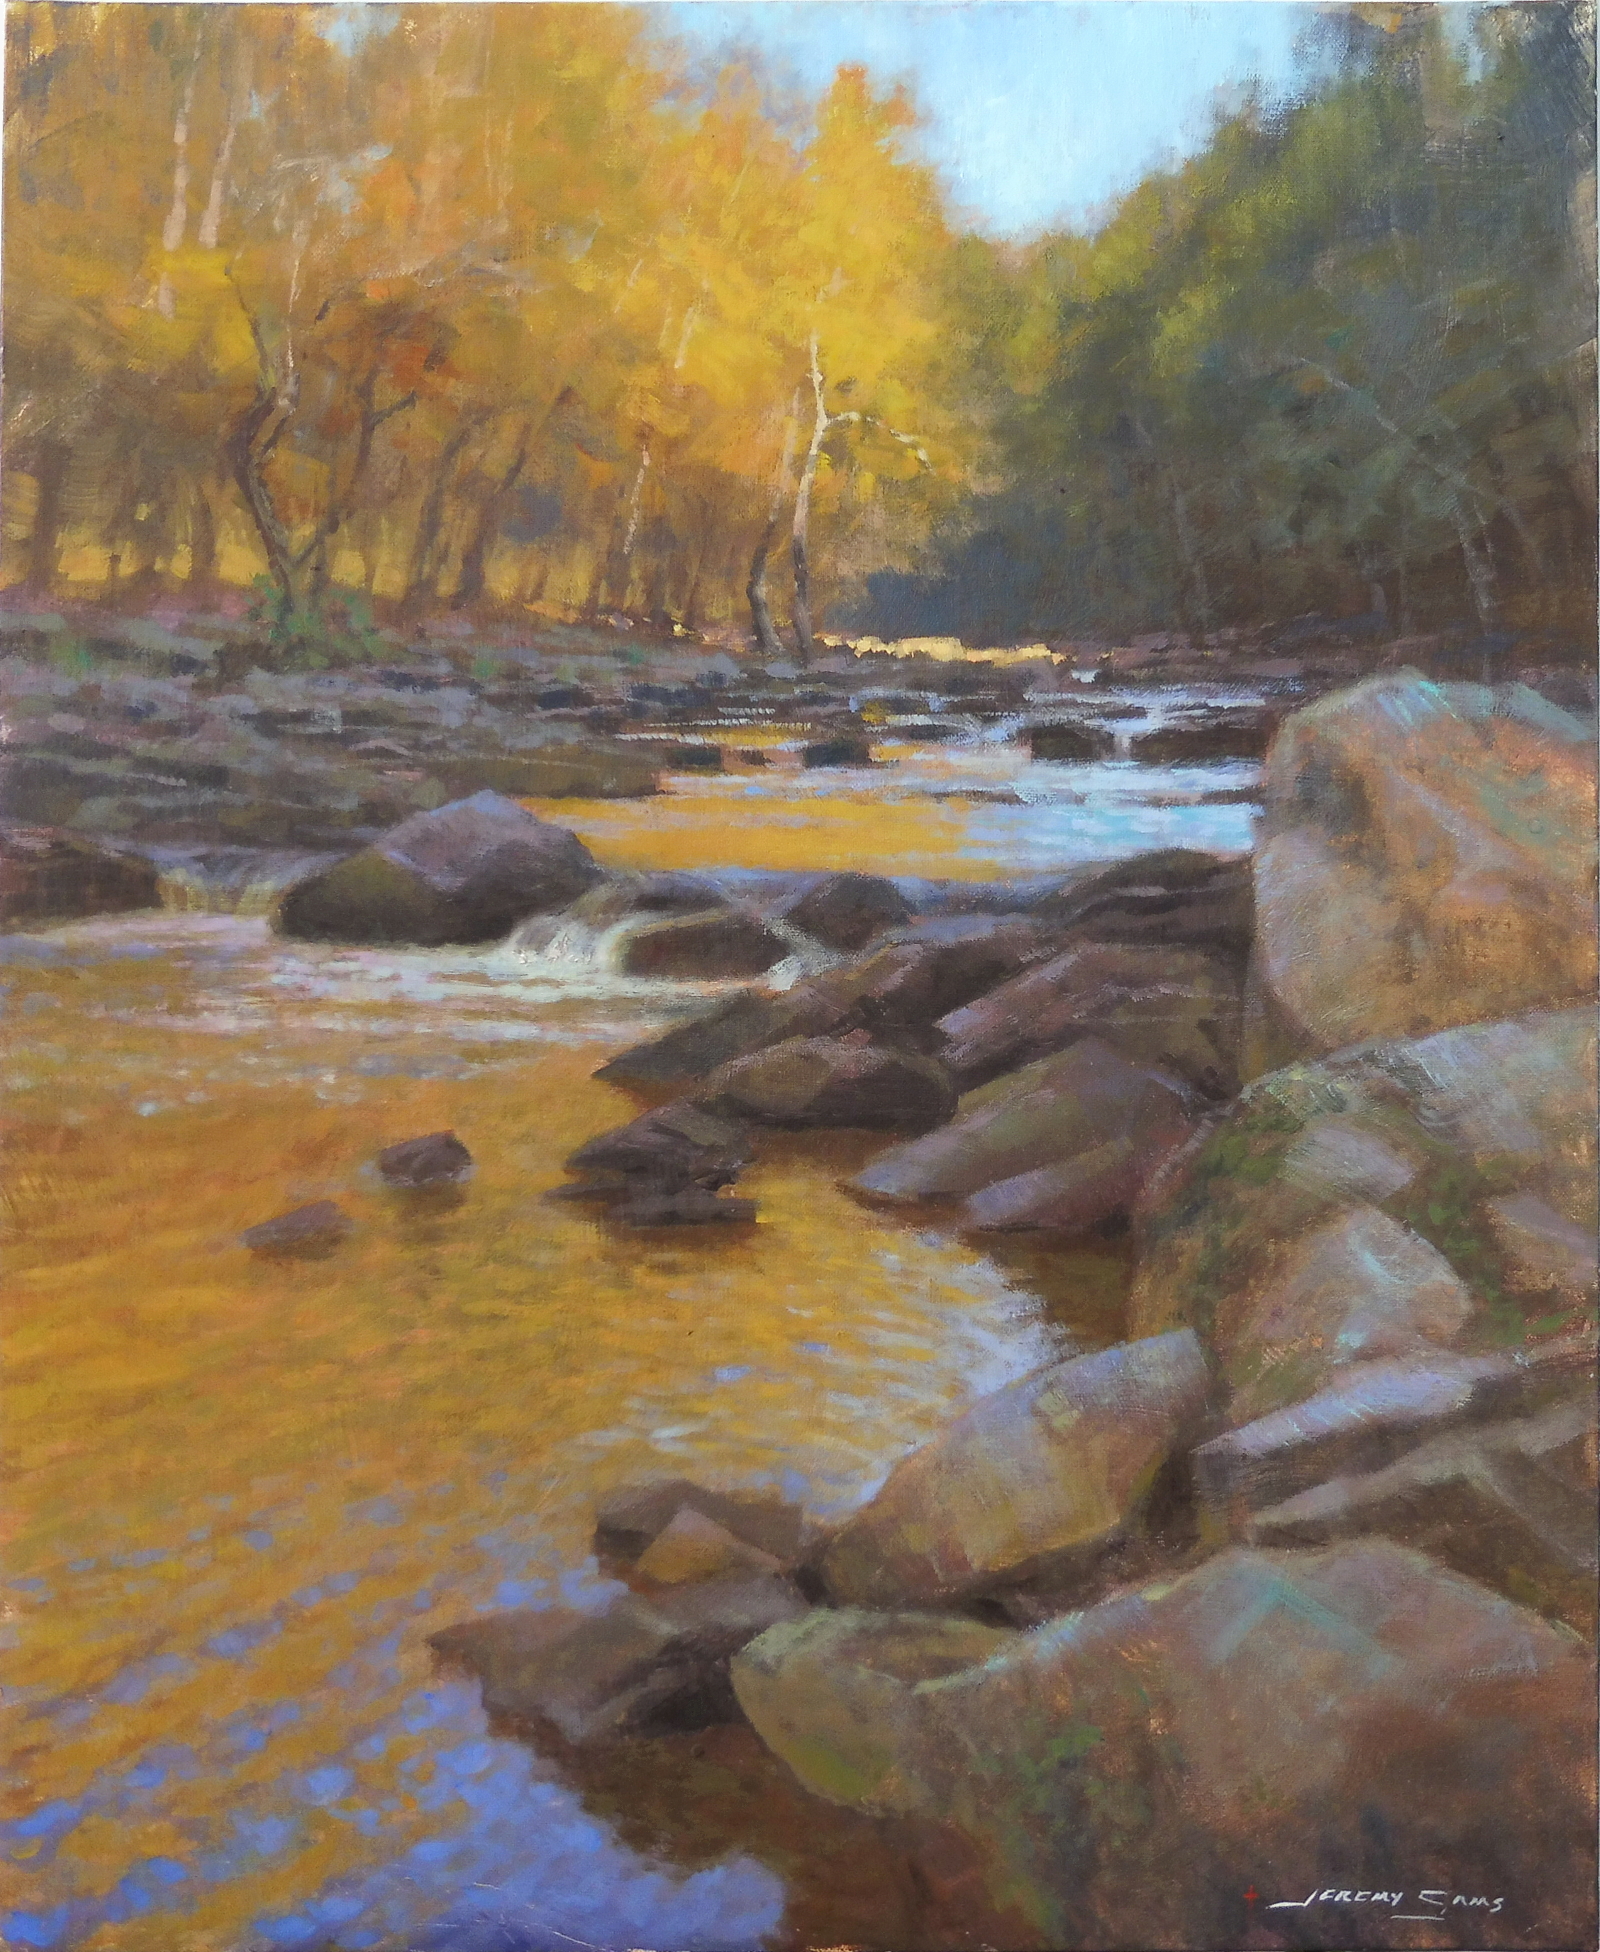 plein air painting of morning on the Eno River in Autumn by North Carolina artist Jeremy Sams